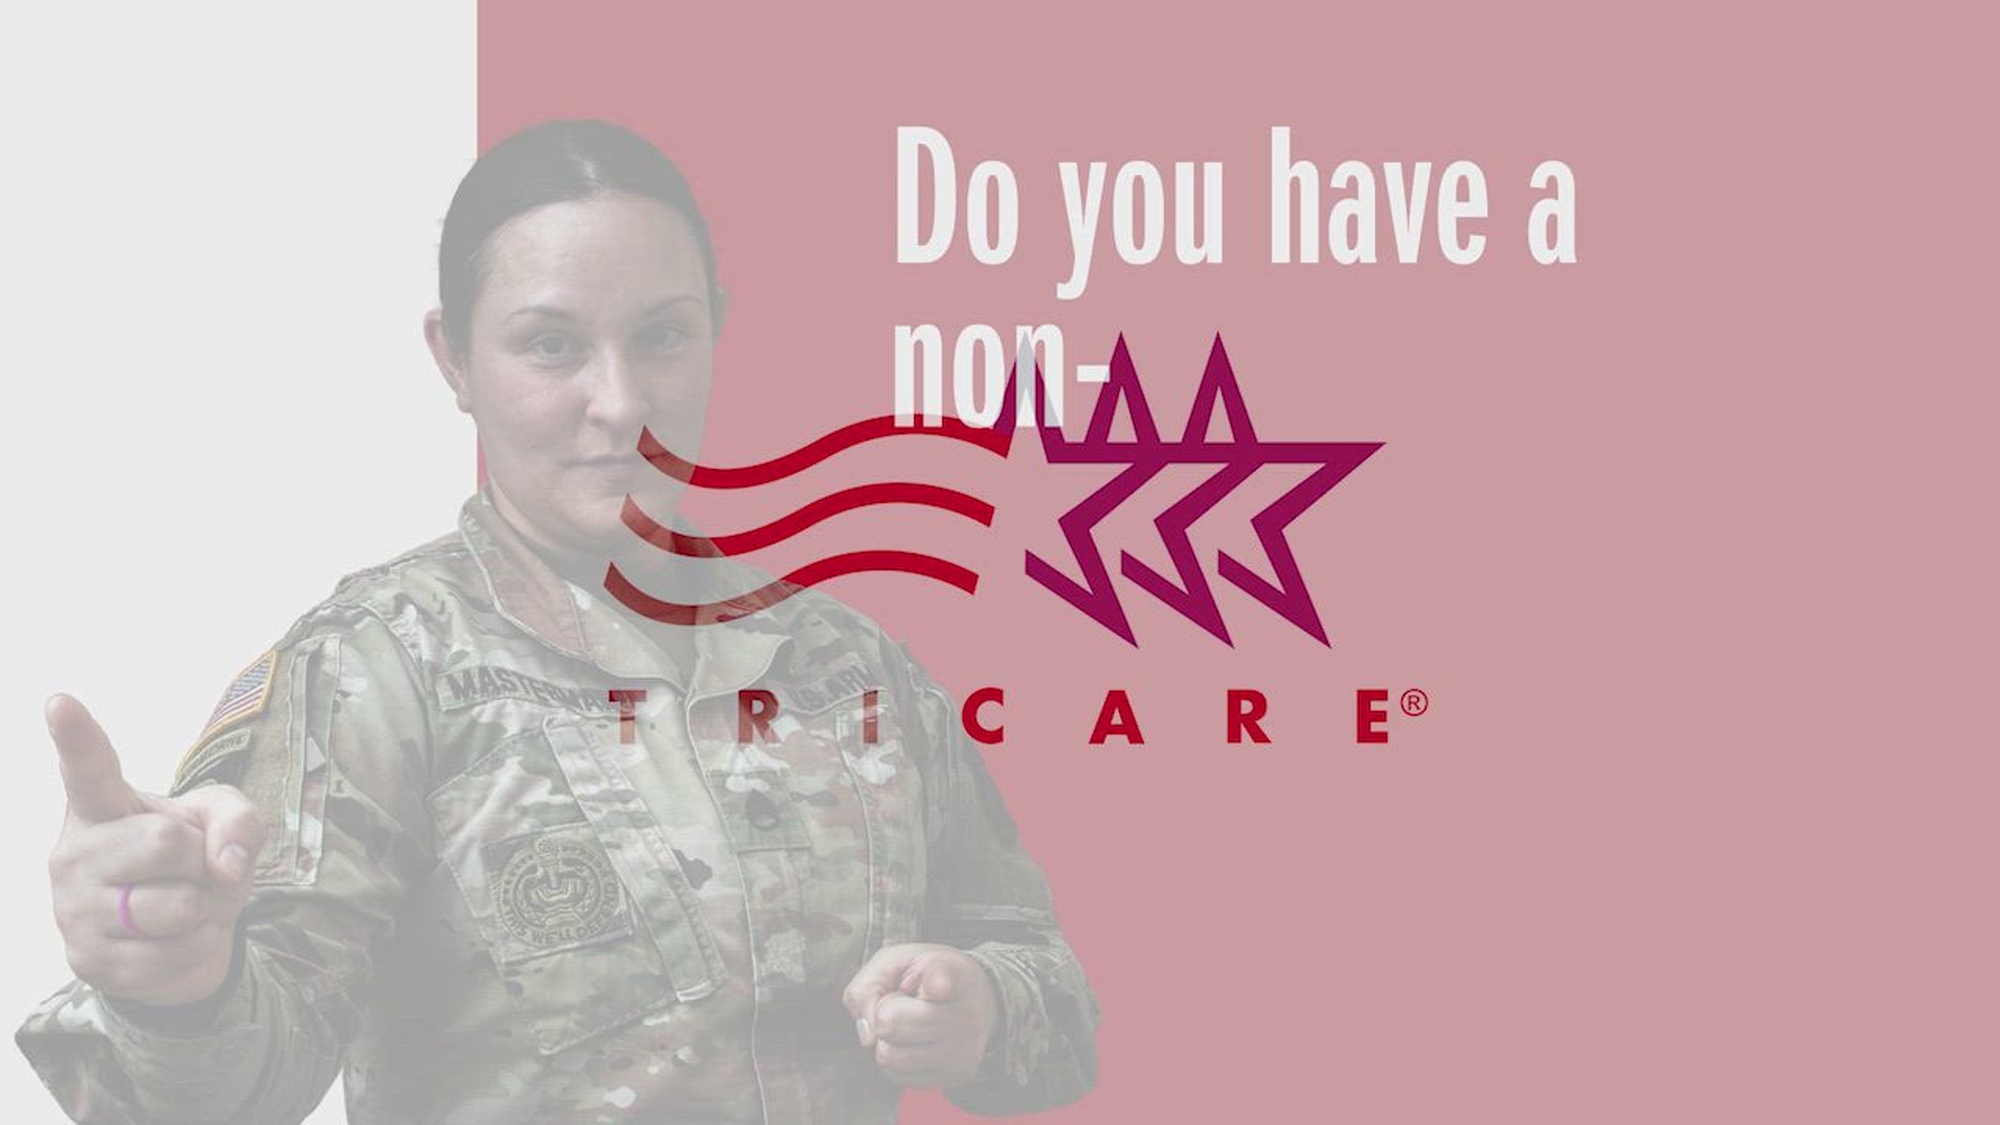 Knowing the difference between Urgent Care and the Emergency Room can be very important. Urgent care is often the best choice for non-emergency treatments like colds, flus, and minor cuts and burns. To get help finding care call TRICARE’s 24/7 nurse advice line at 1-800-TIRCARE or 1-800-874-2273.